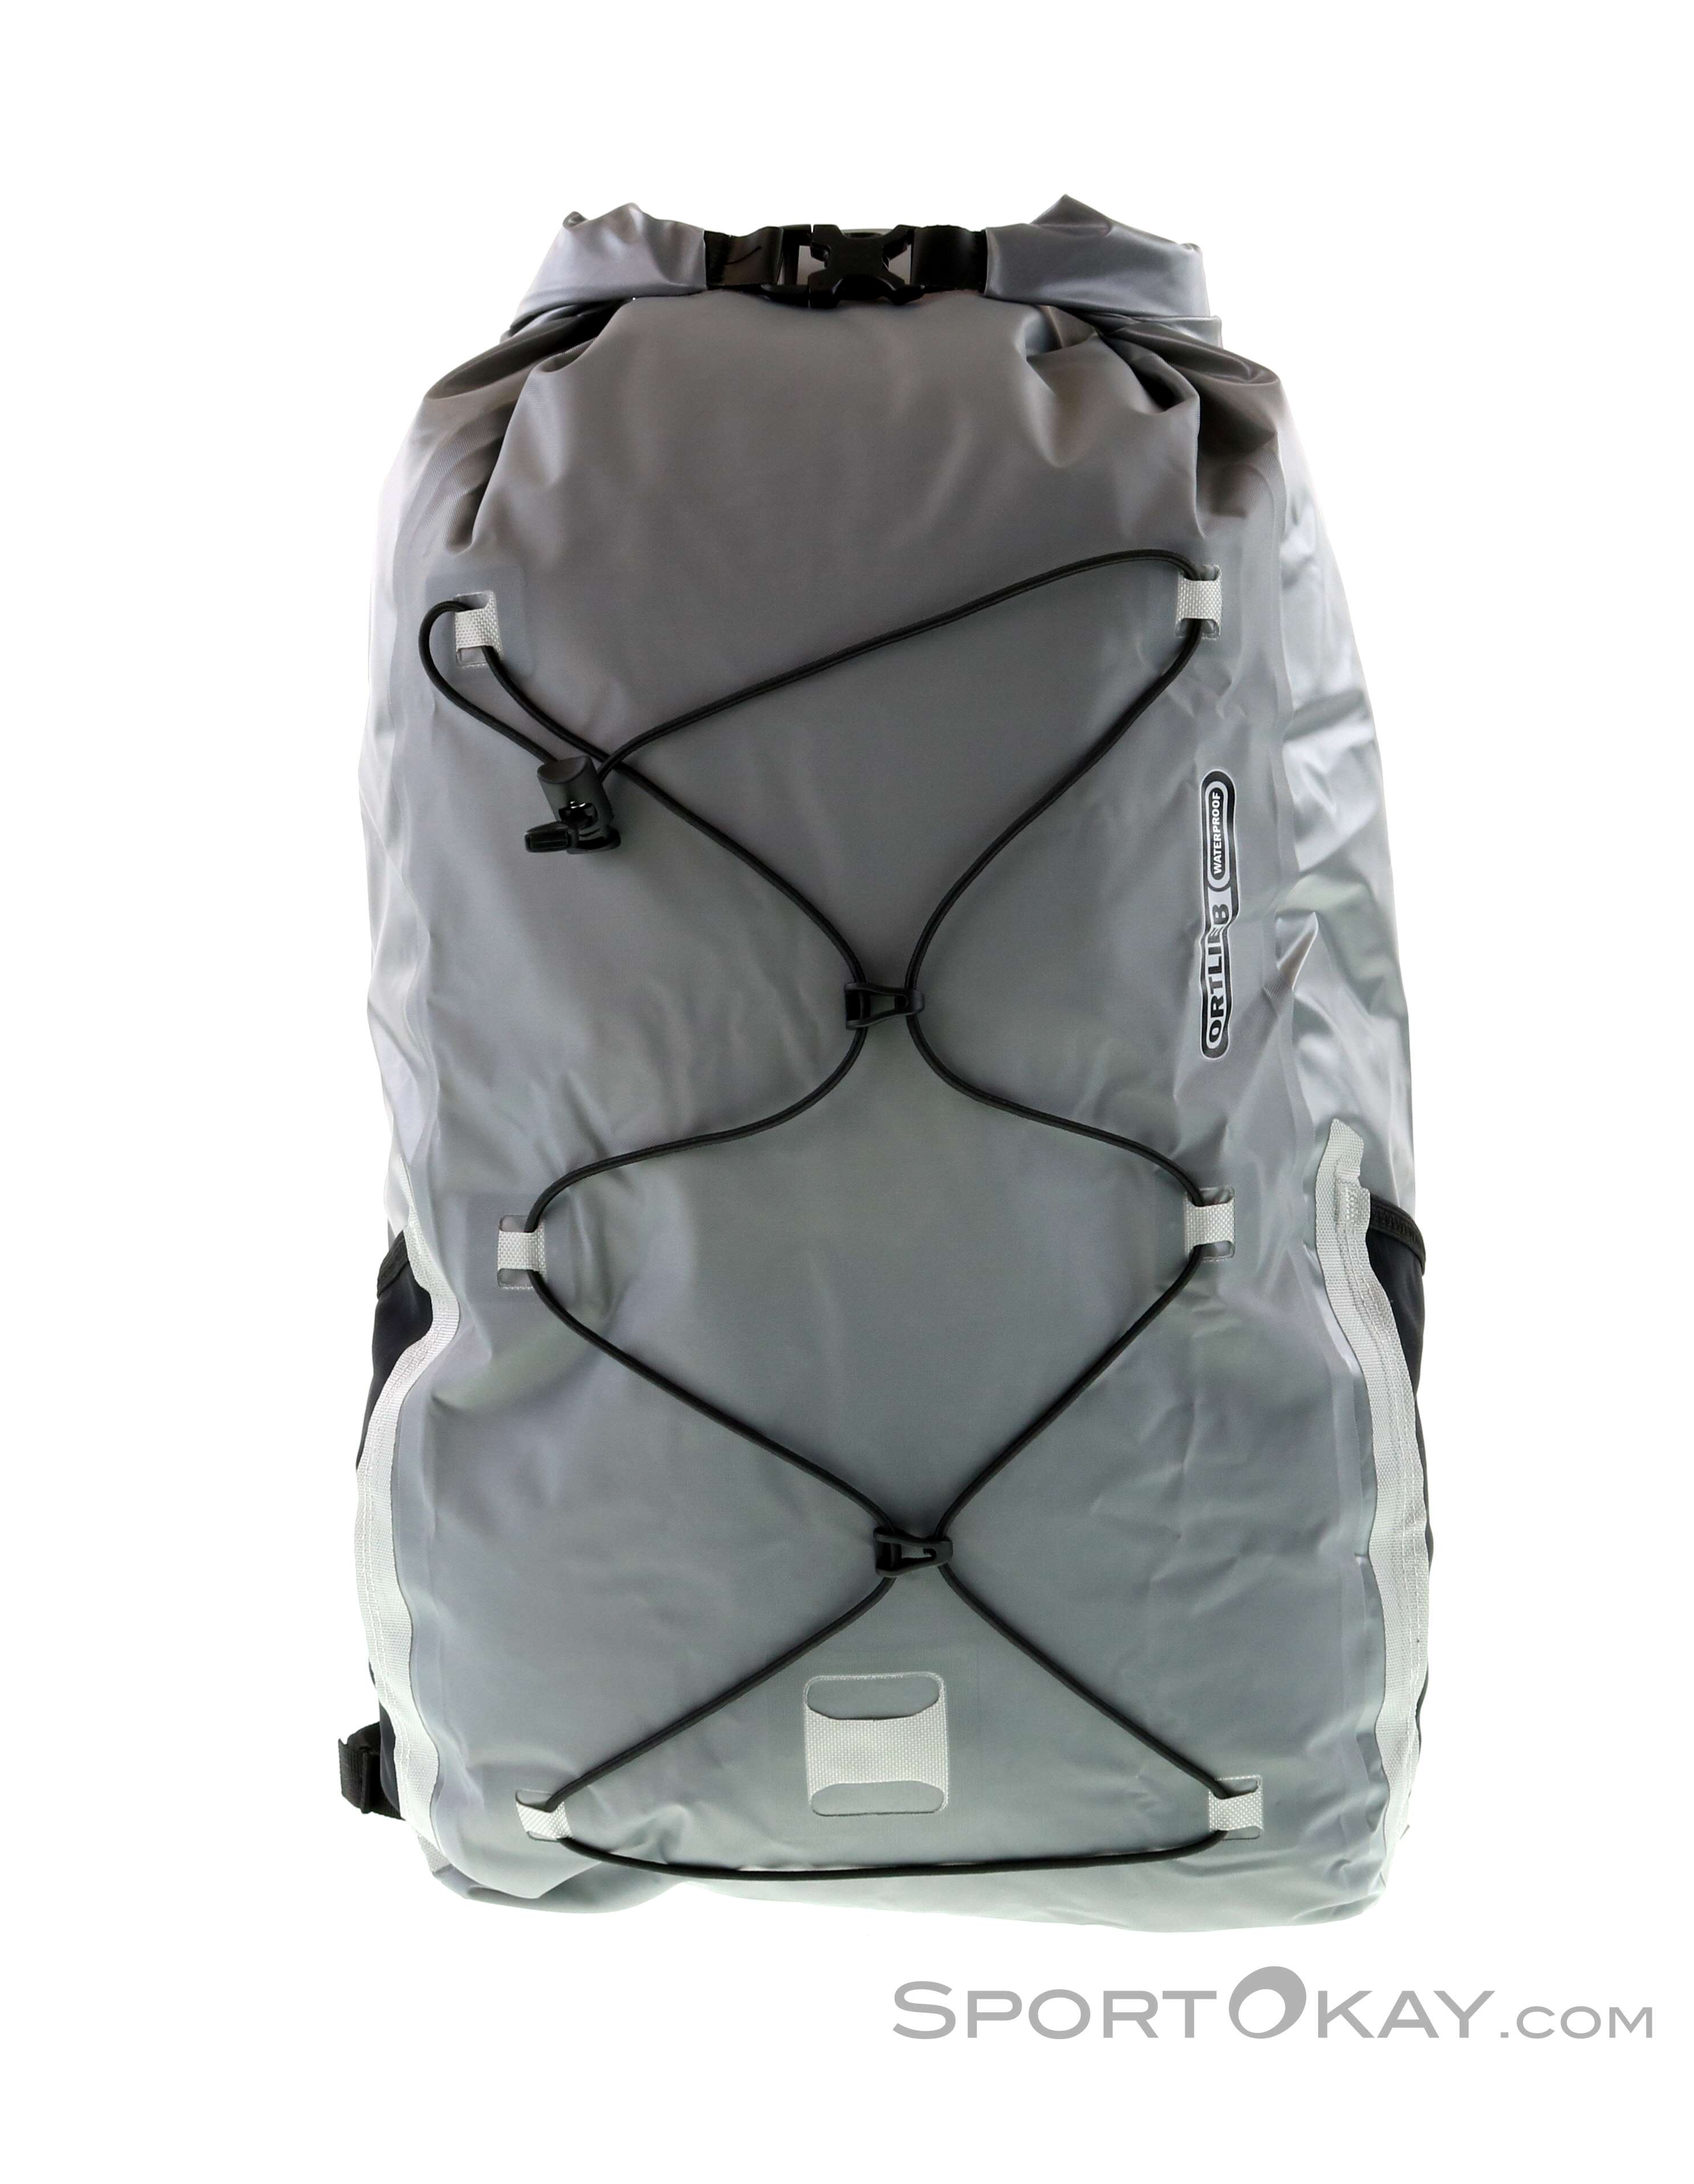 Ortlieb Light Pack Backpack - Backpacks - & Headlamps - Outdoor All